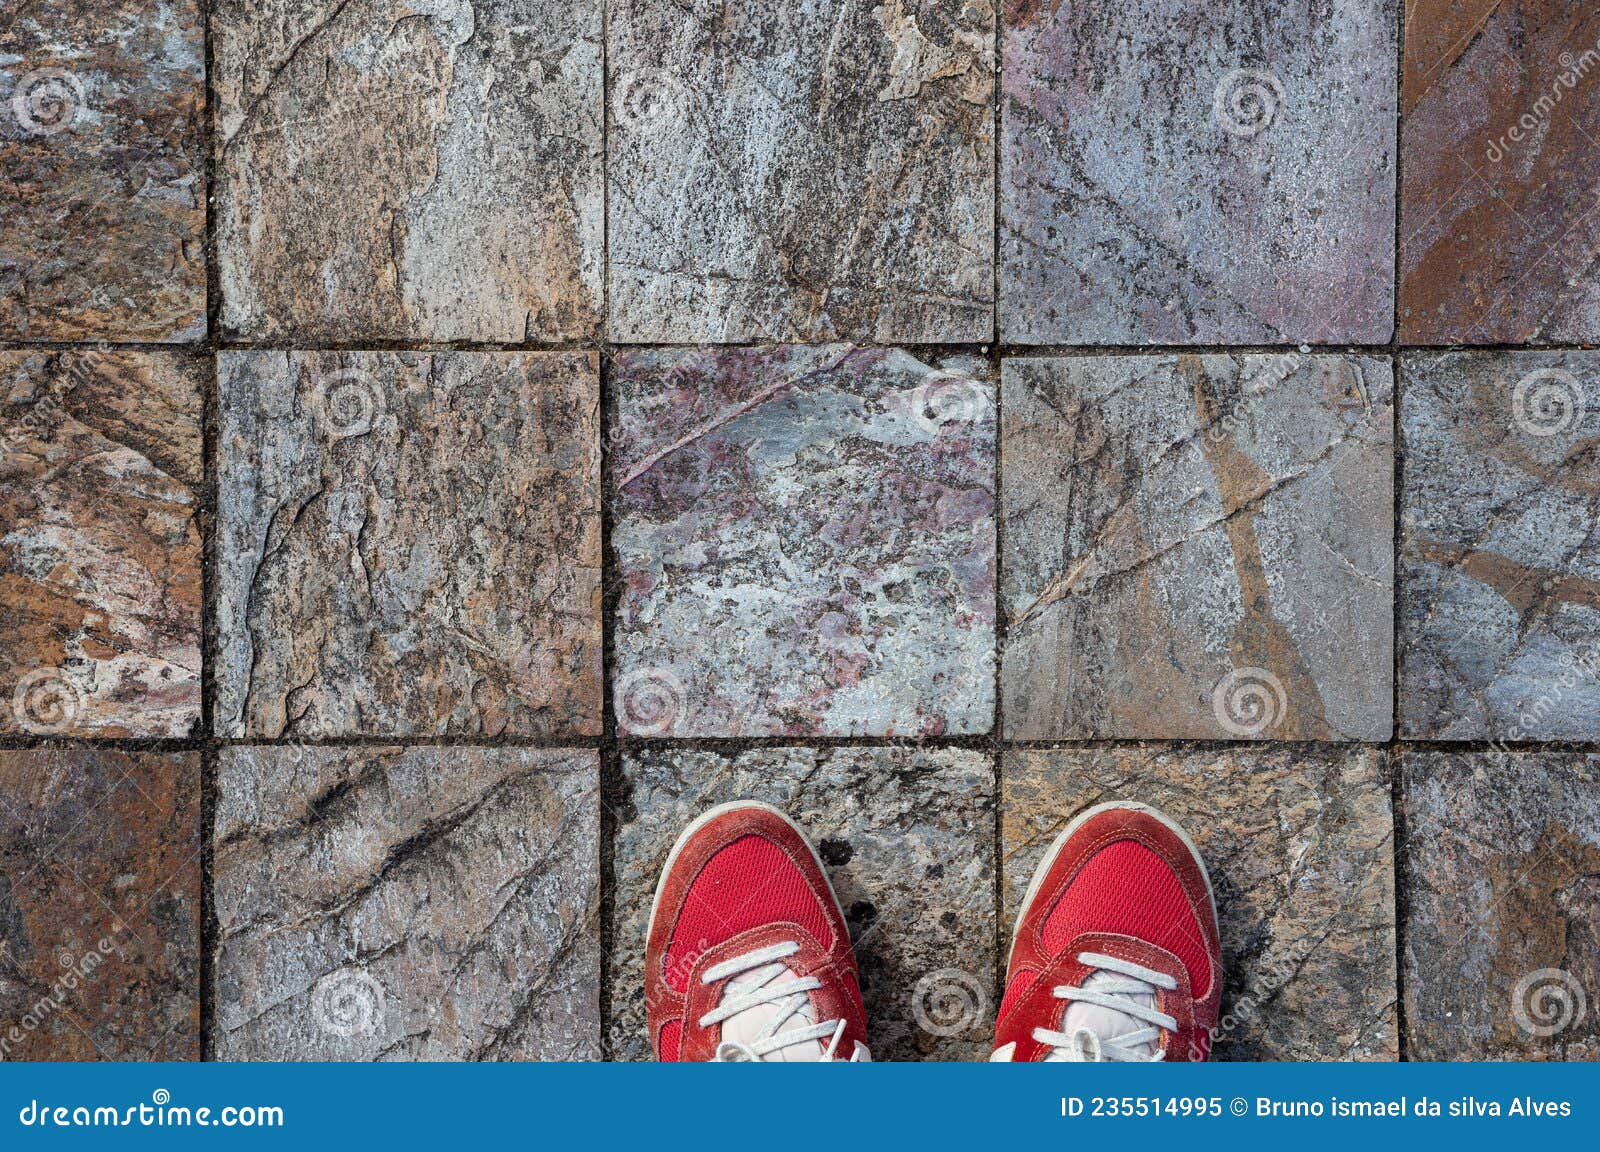 red shoes on a beautiful stone floor grid of squares, arquitecture background.